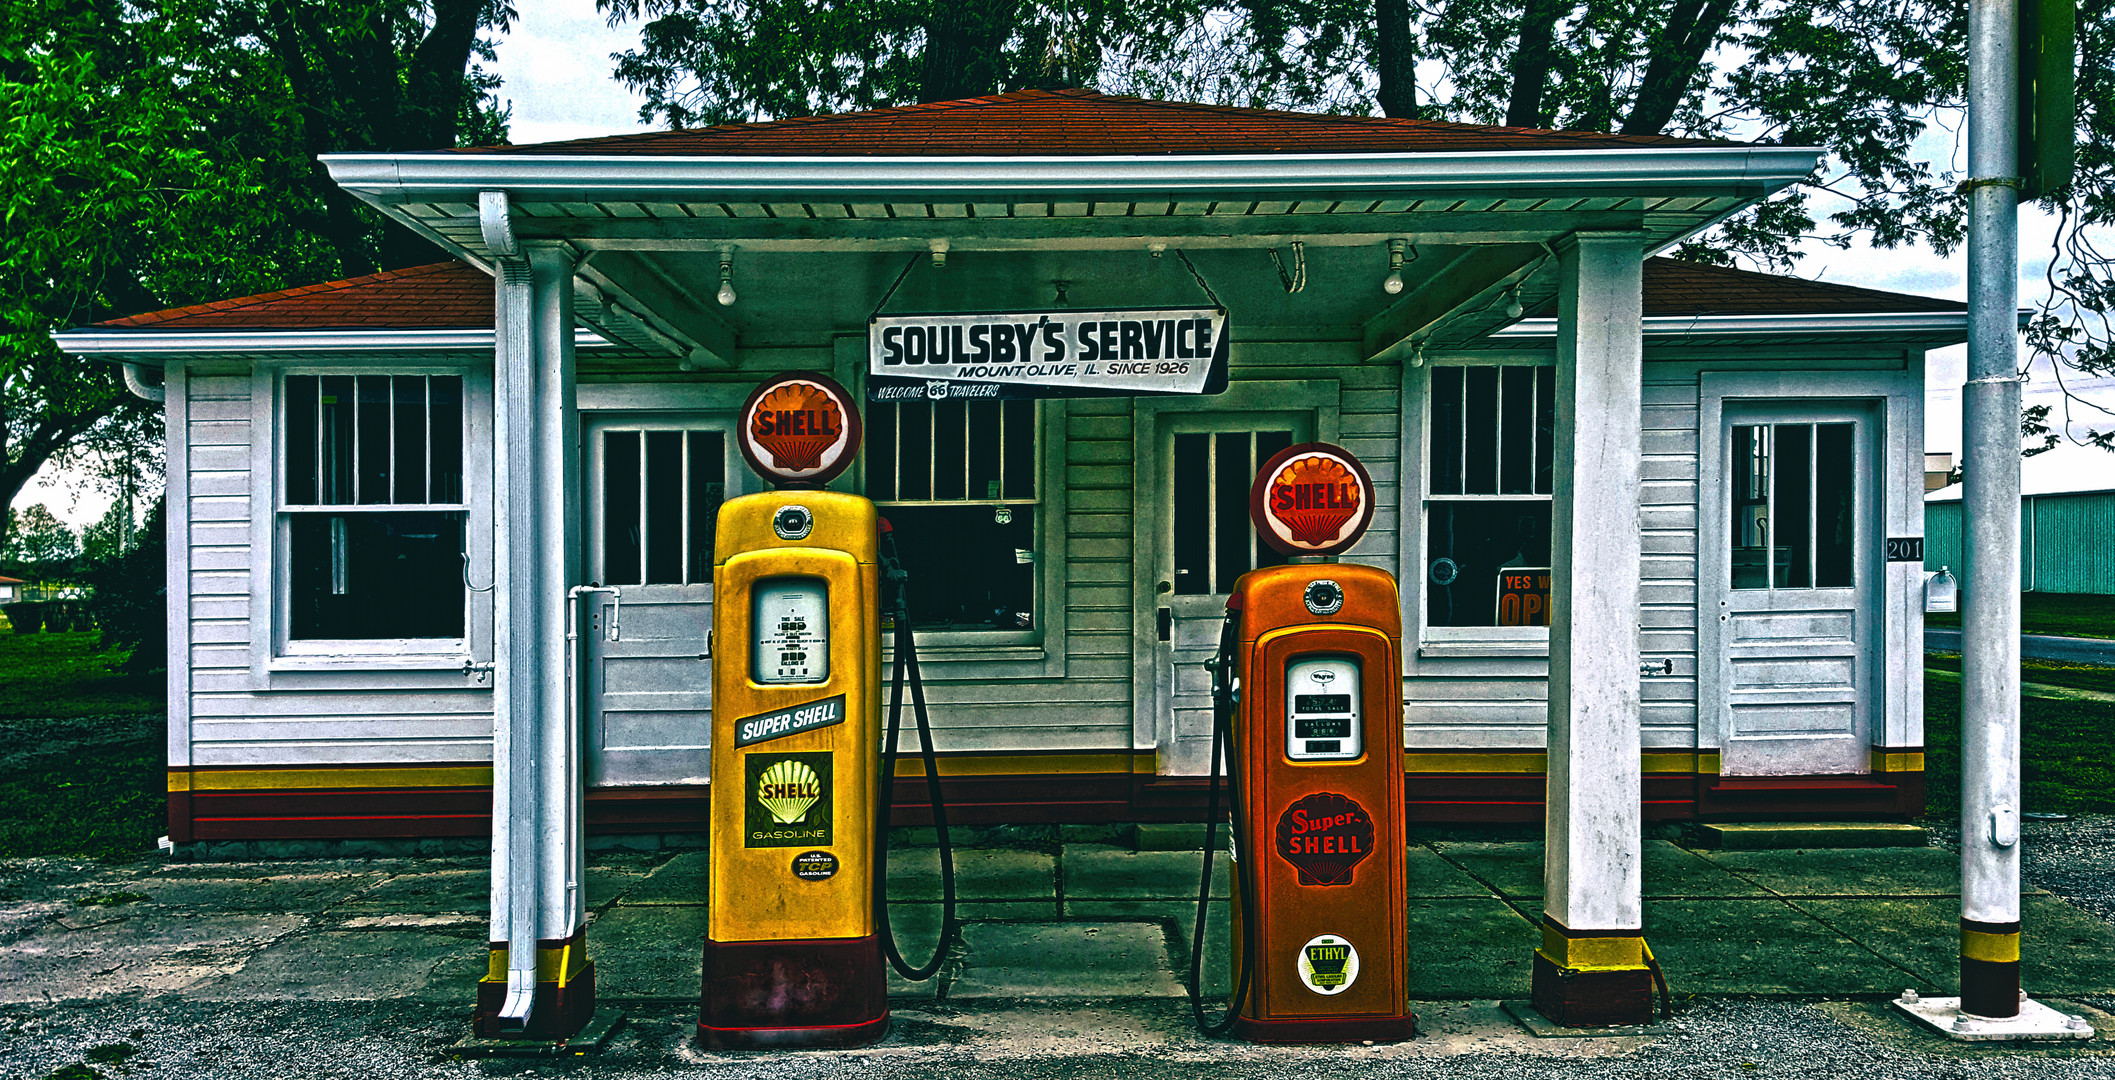 soulsby gas station, mt. olive, ill.